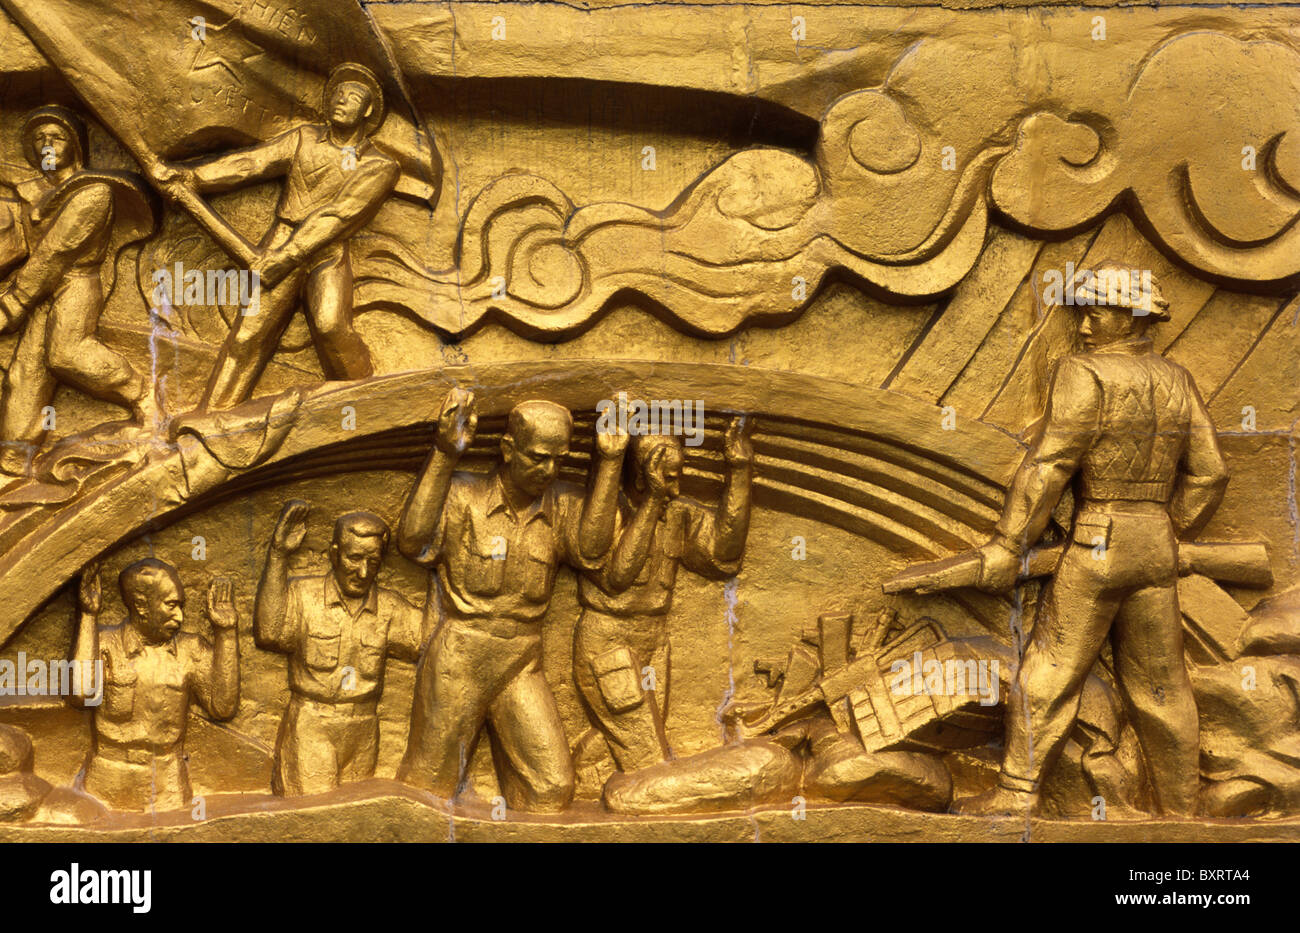 Reliefs with  the scenes from the Battle of Dien Bien Phu at war cemetery; French commanders surrender to Viet Minh soldiers. Stock Photo